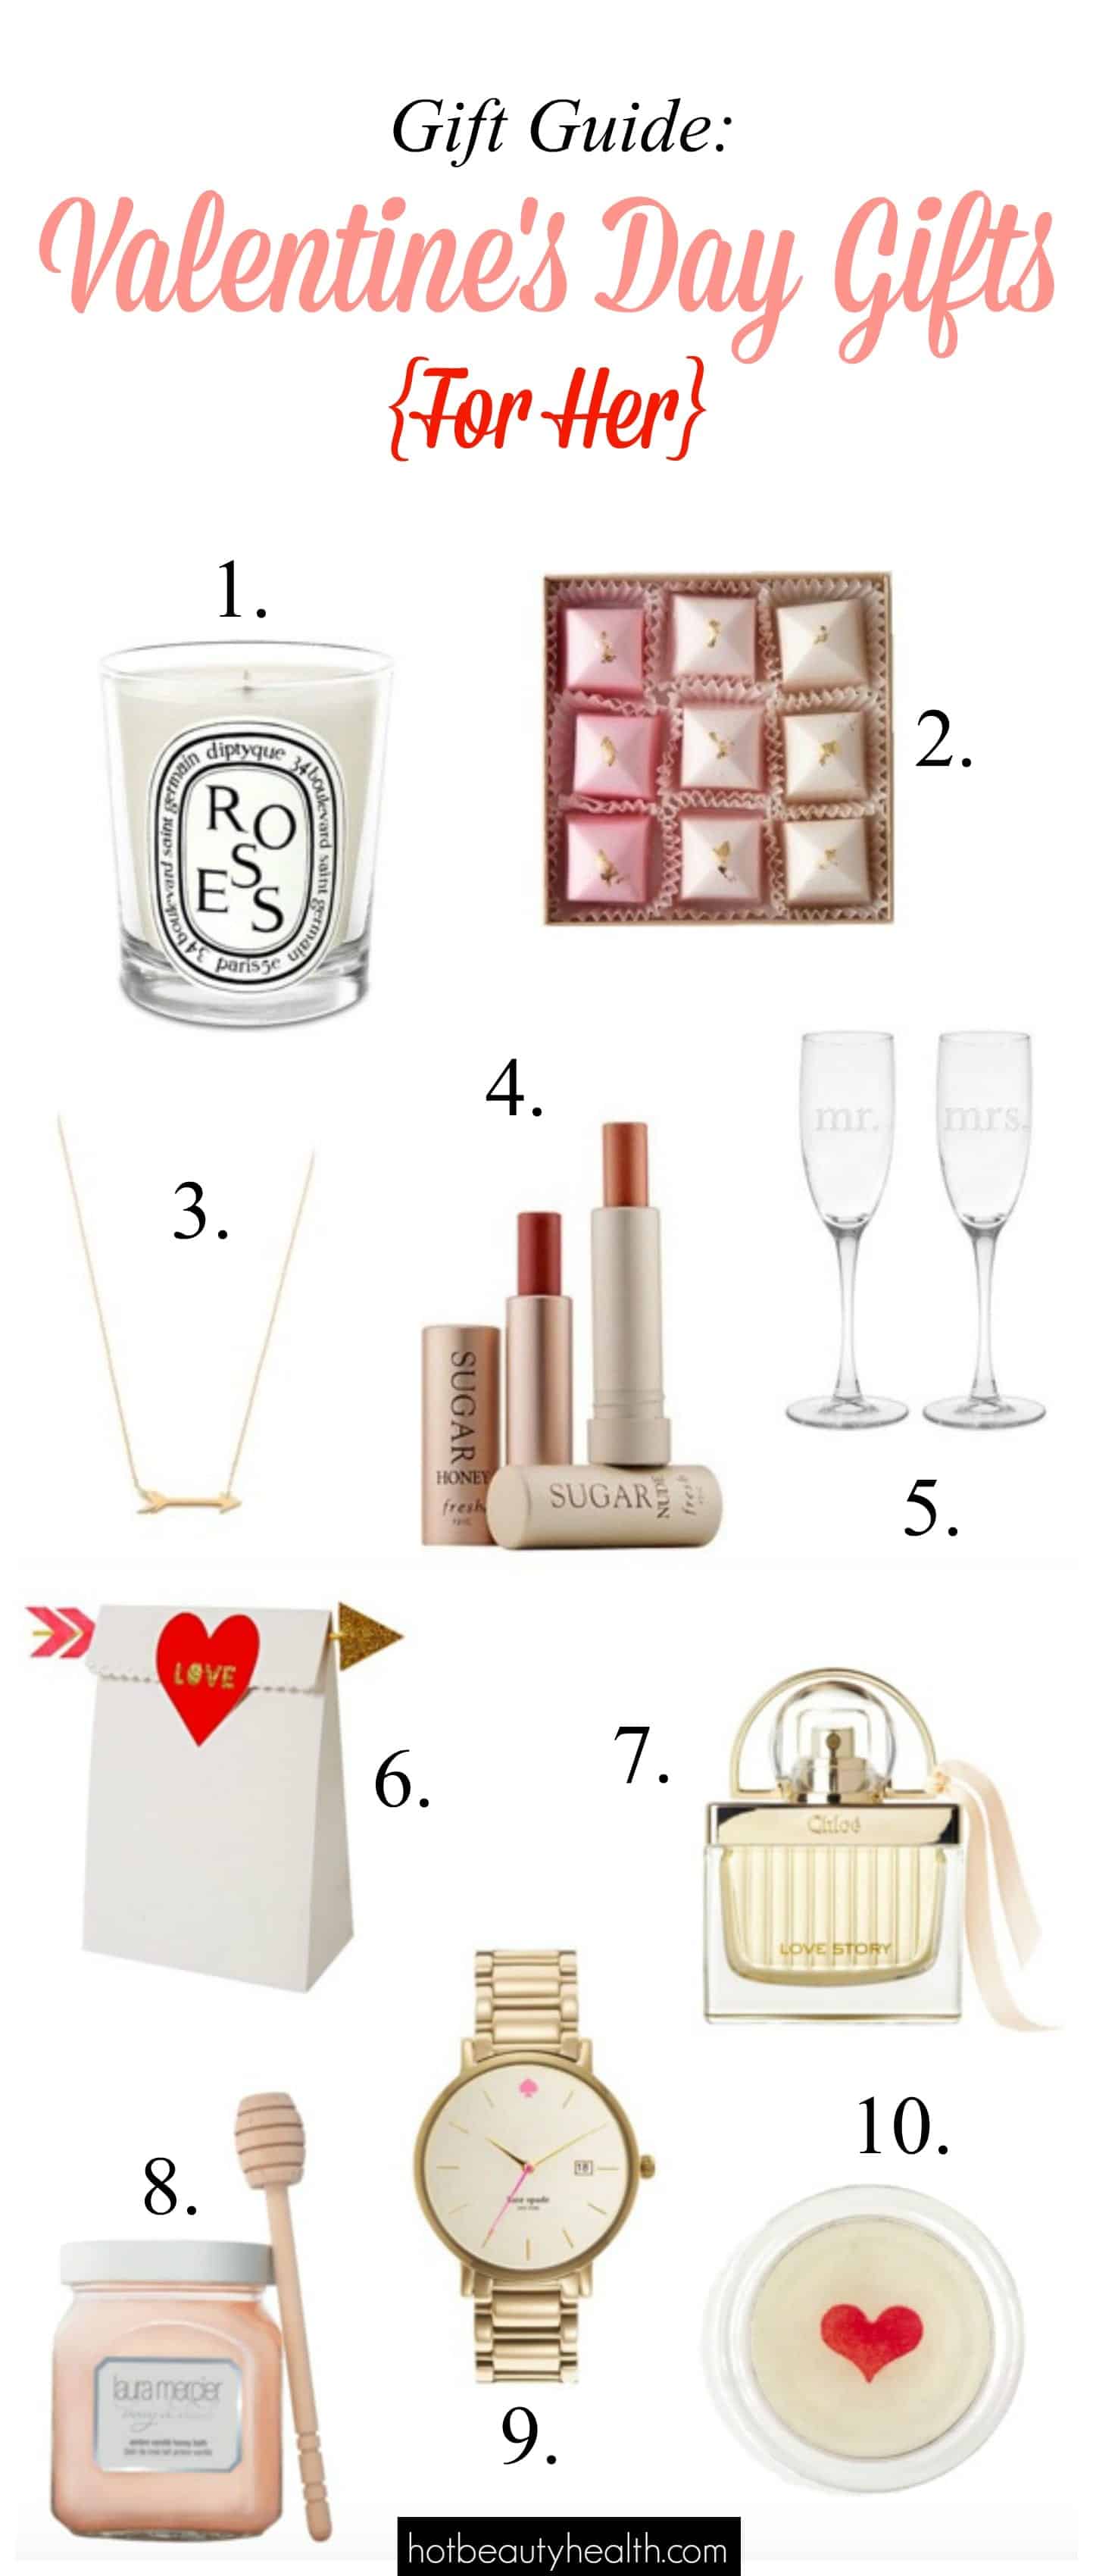 Top 10 Valentine's Day Gifts for Her